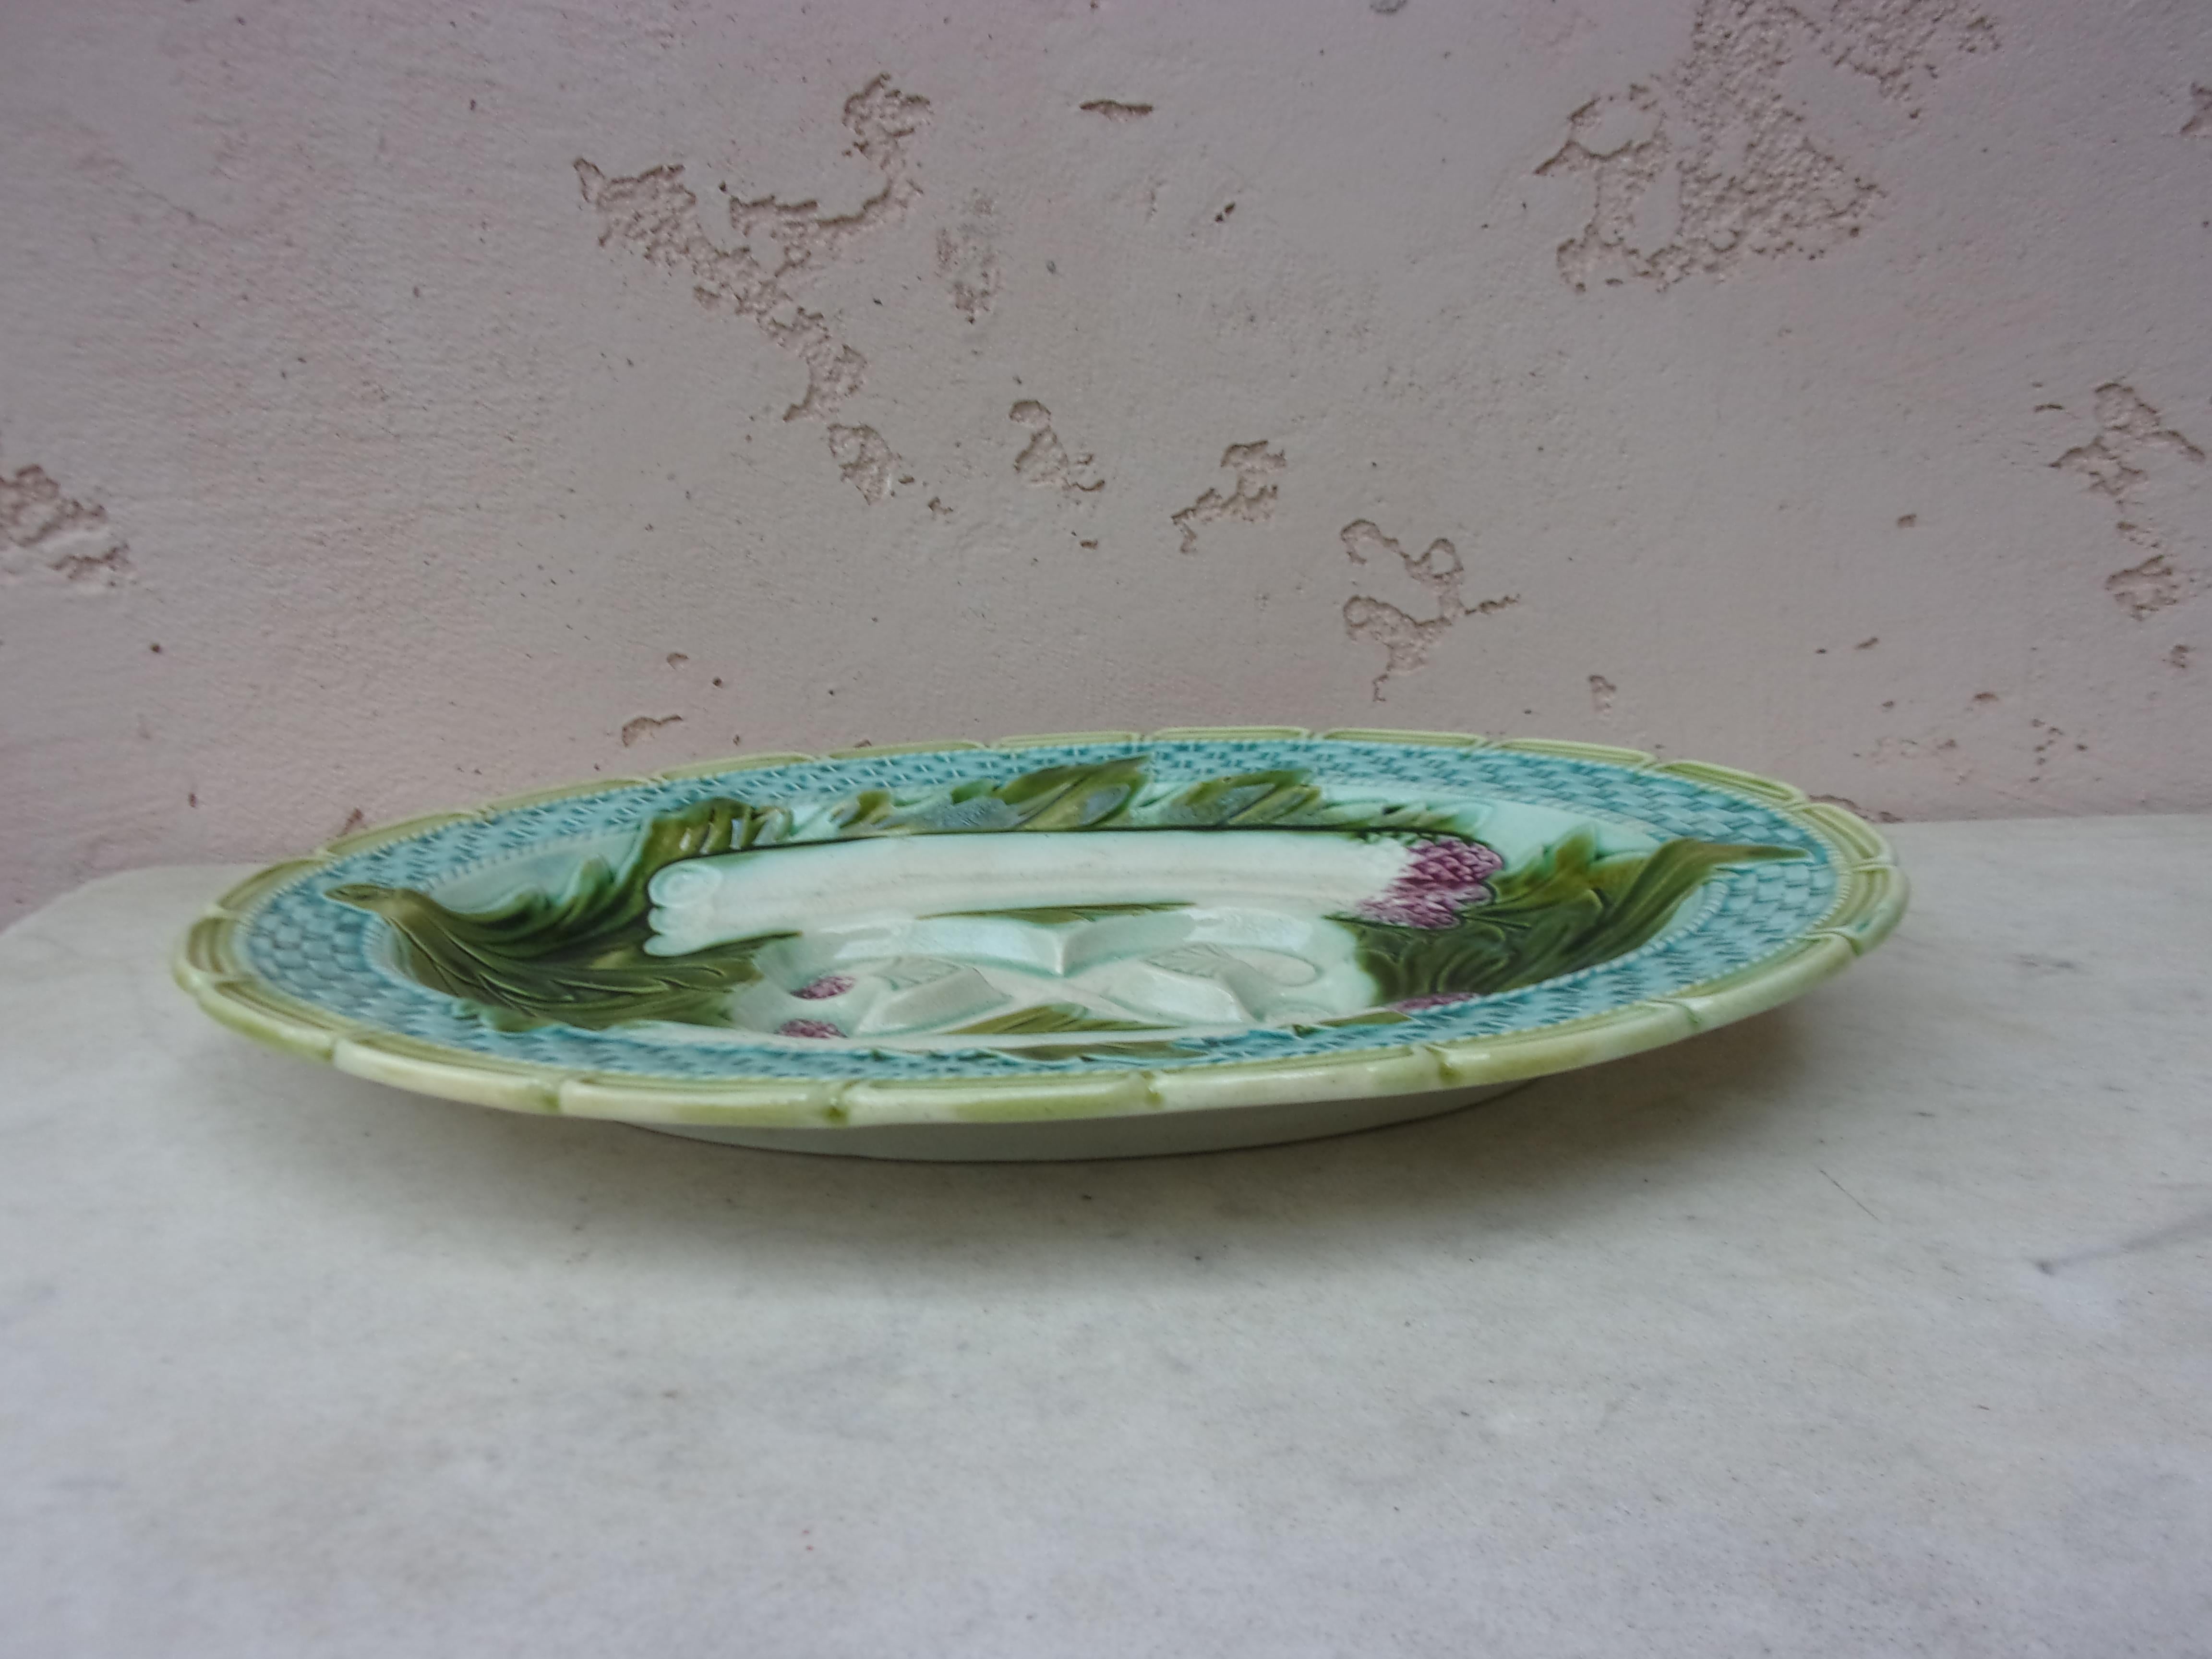 Rustic French Majolica Asparagus Platter Orchies, circa 1900